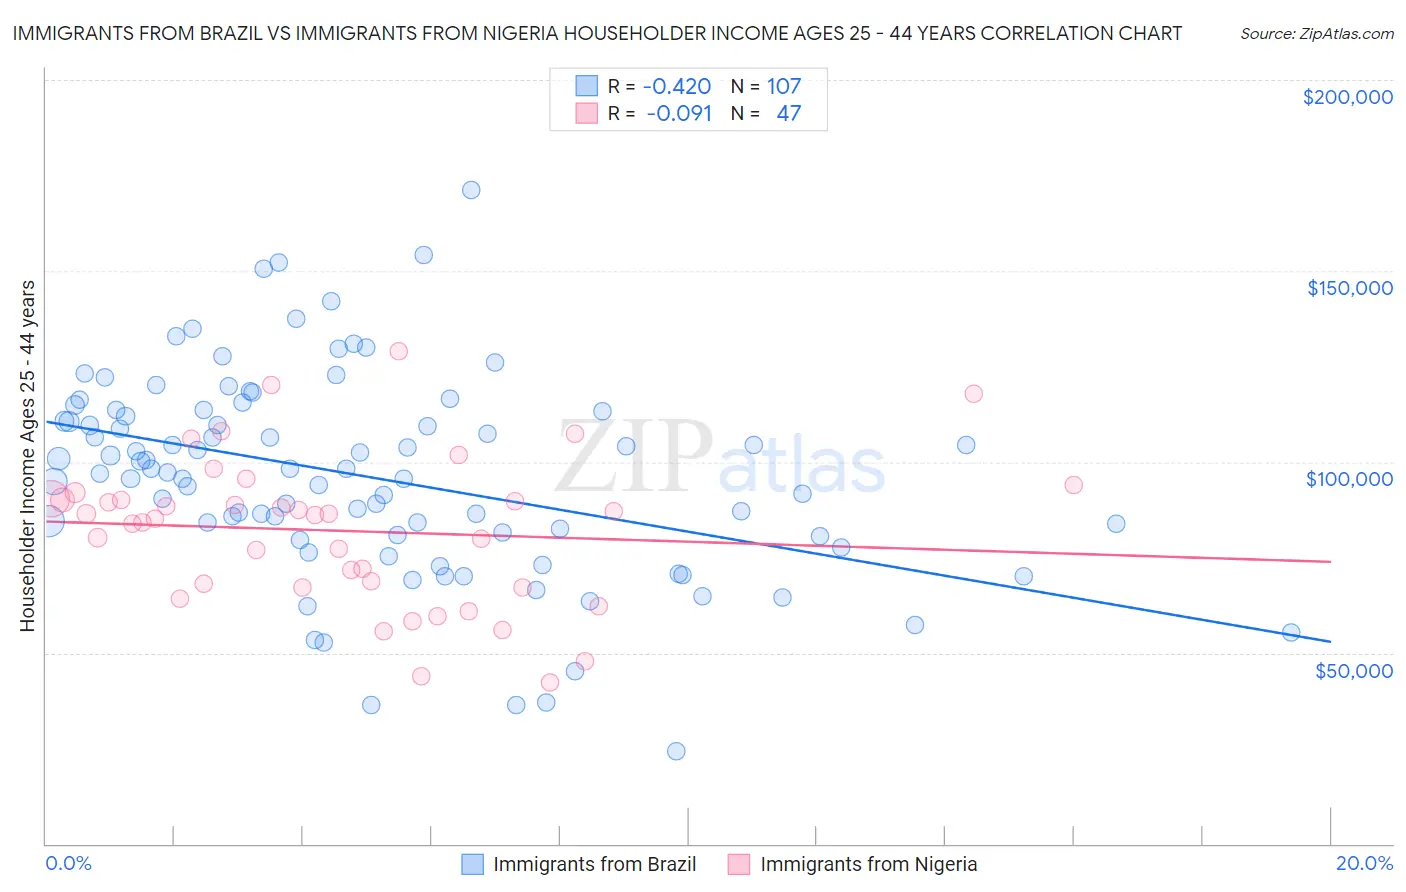 Immigrants from Brazil vs Immigrants from Nigeria Householder Income Ages 25 - 44 years